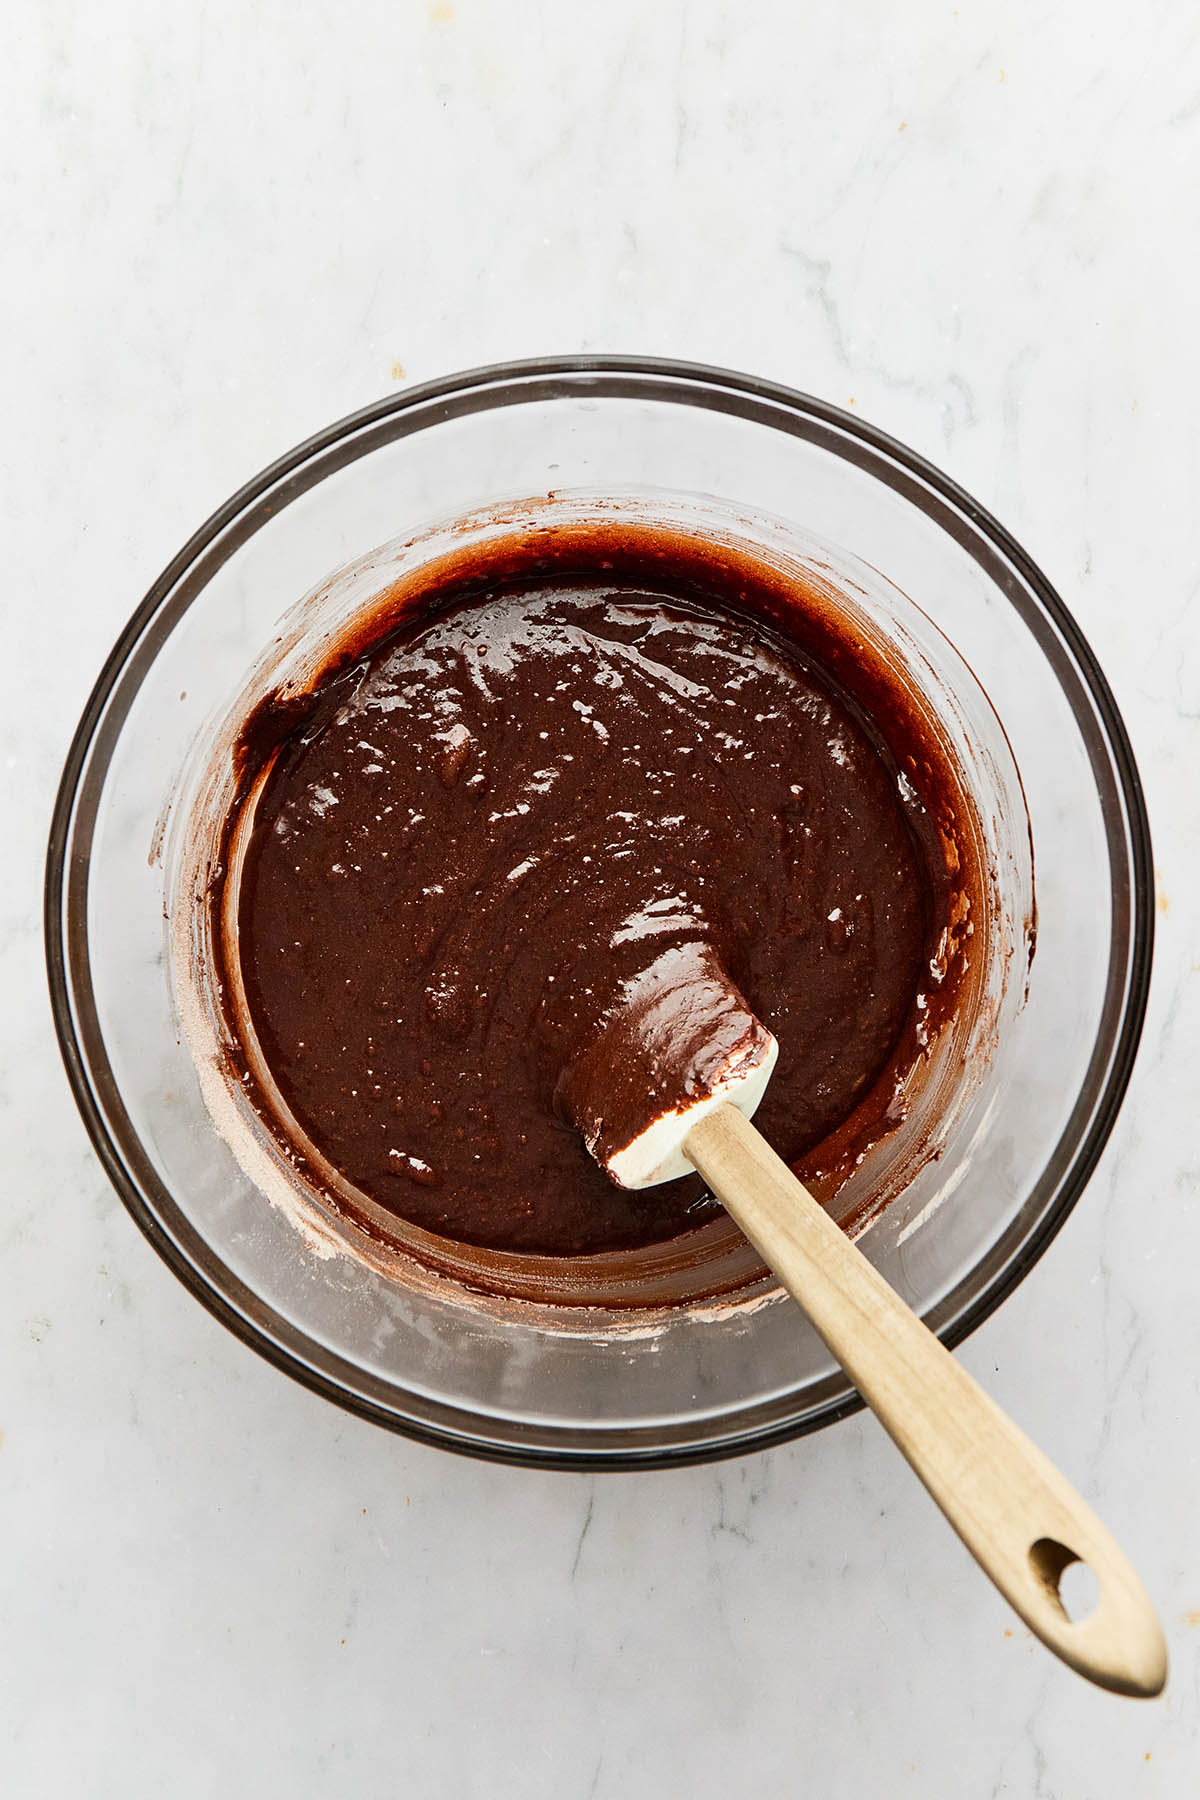 A large glass bowl of chocolate batter.